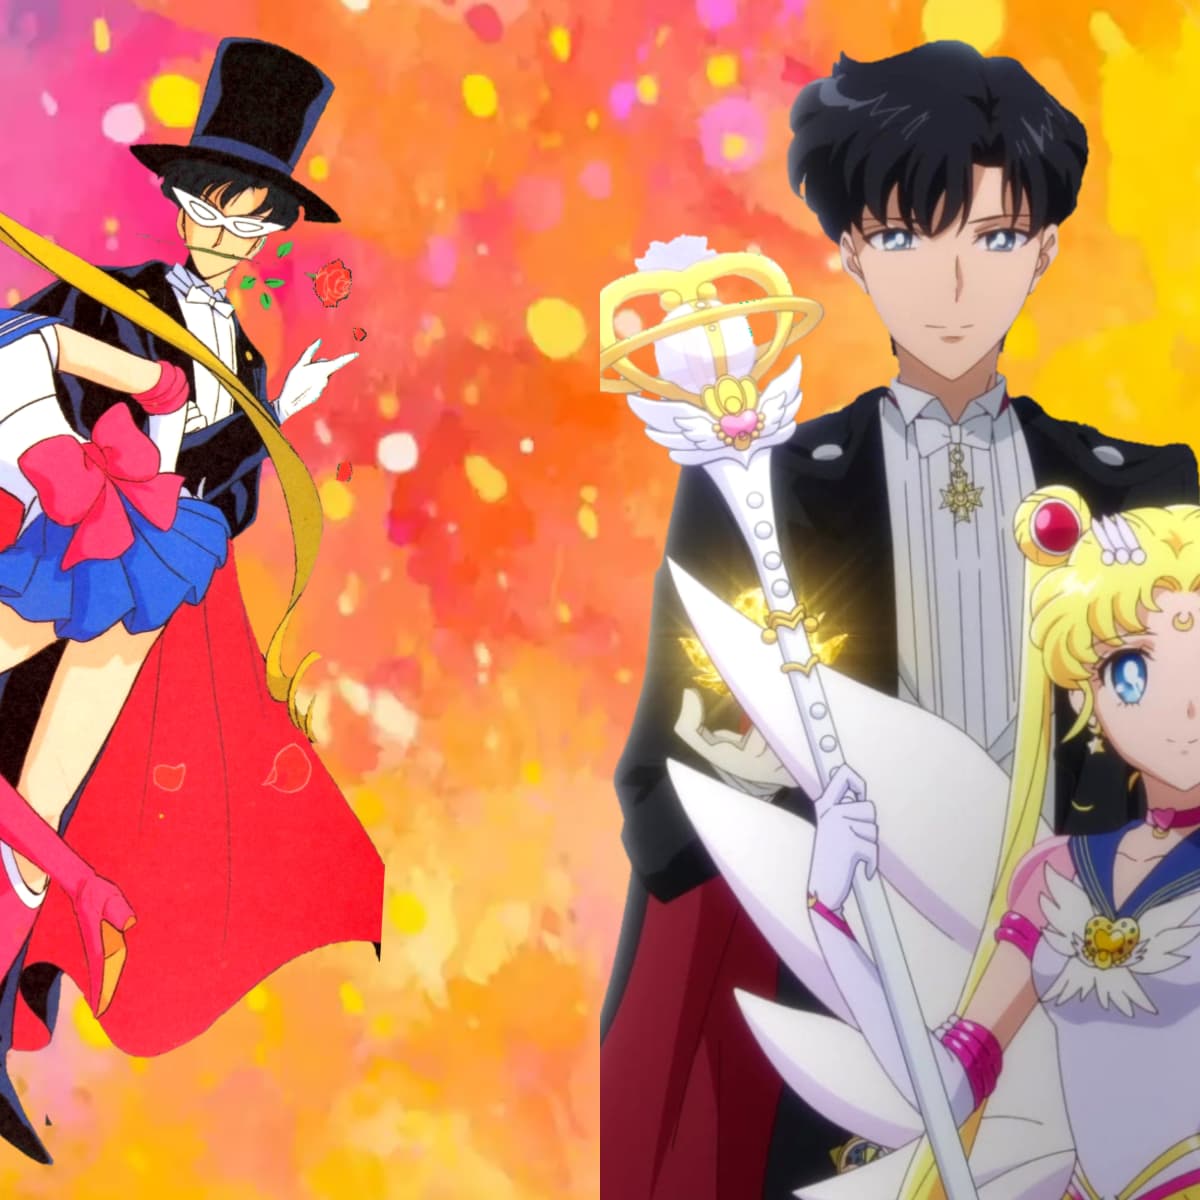 Bad Romance: The Problematic Relationships of Sailor Moon